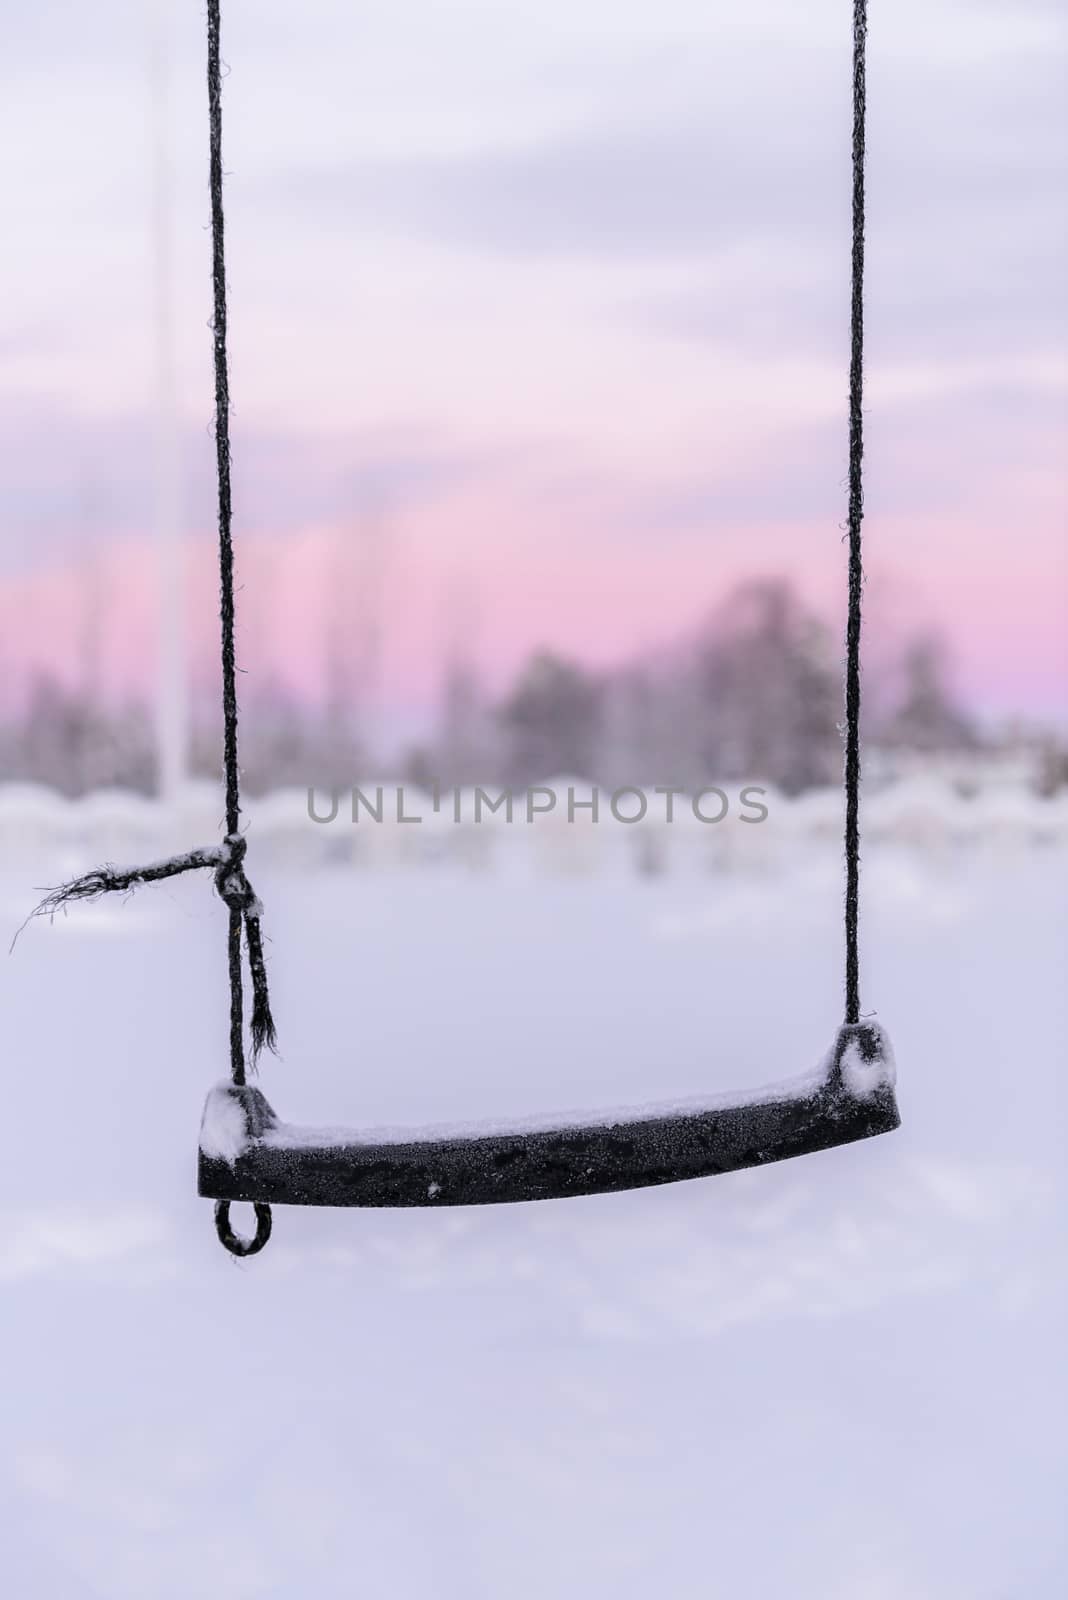 The swing has covered with heavy snow and sunset time in winter season at Holiday Village Kuukiuru, Finland.